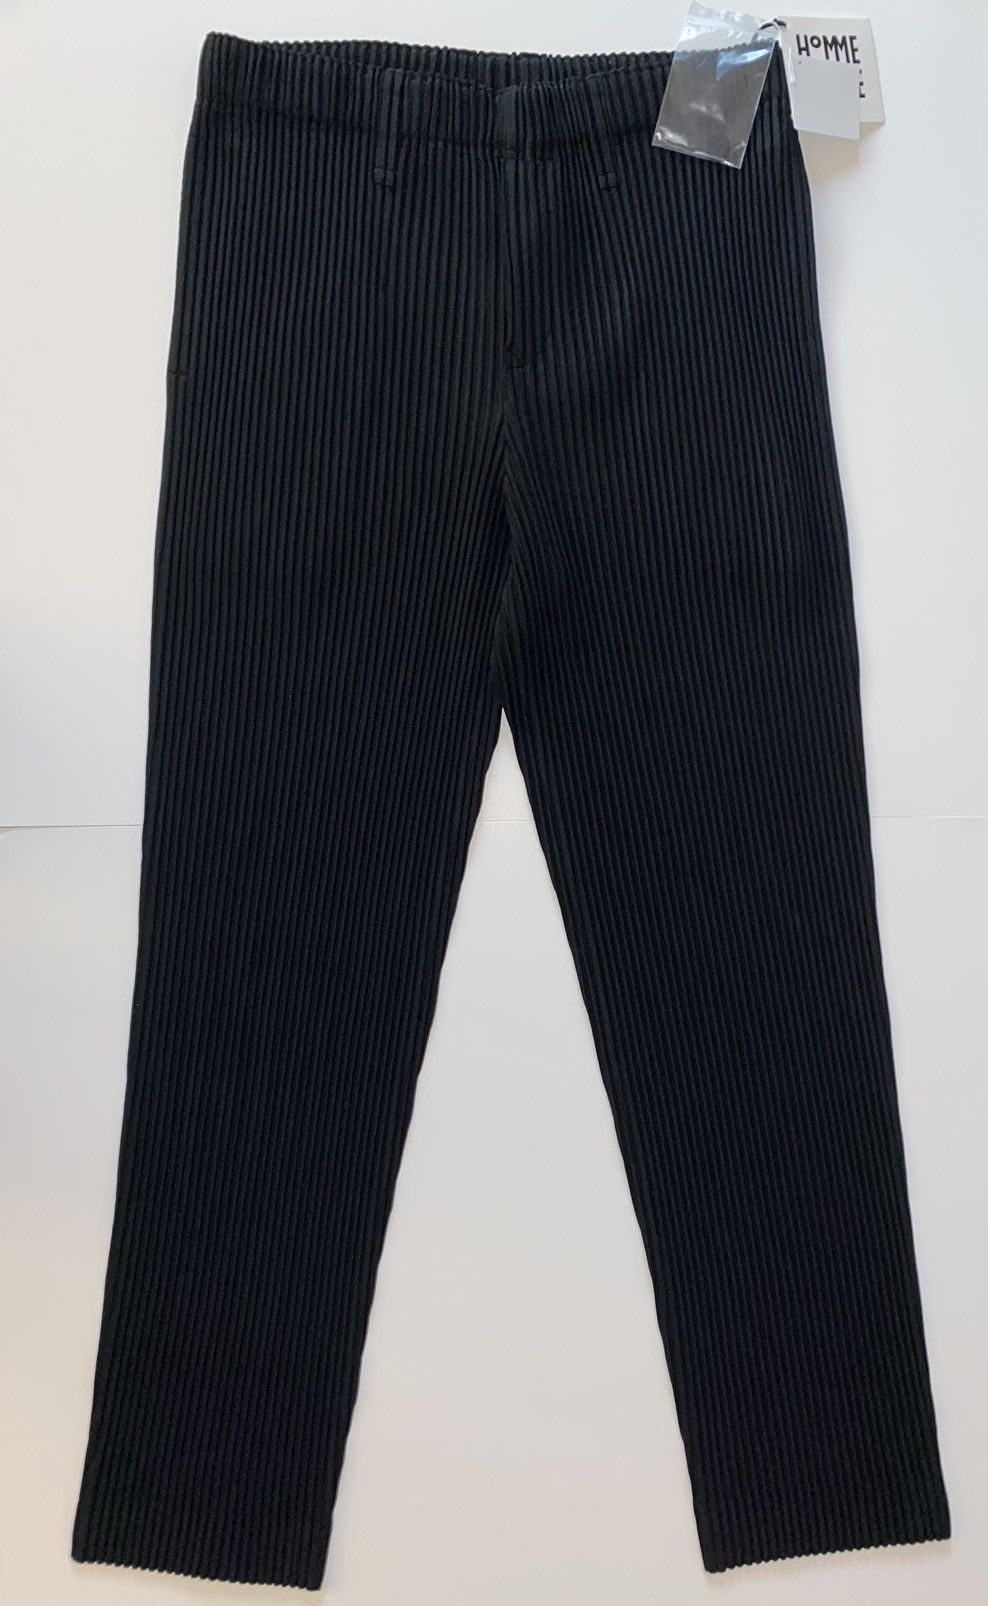 Homme Plissé Issey Miyake JF150 Pleated Trouser Black